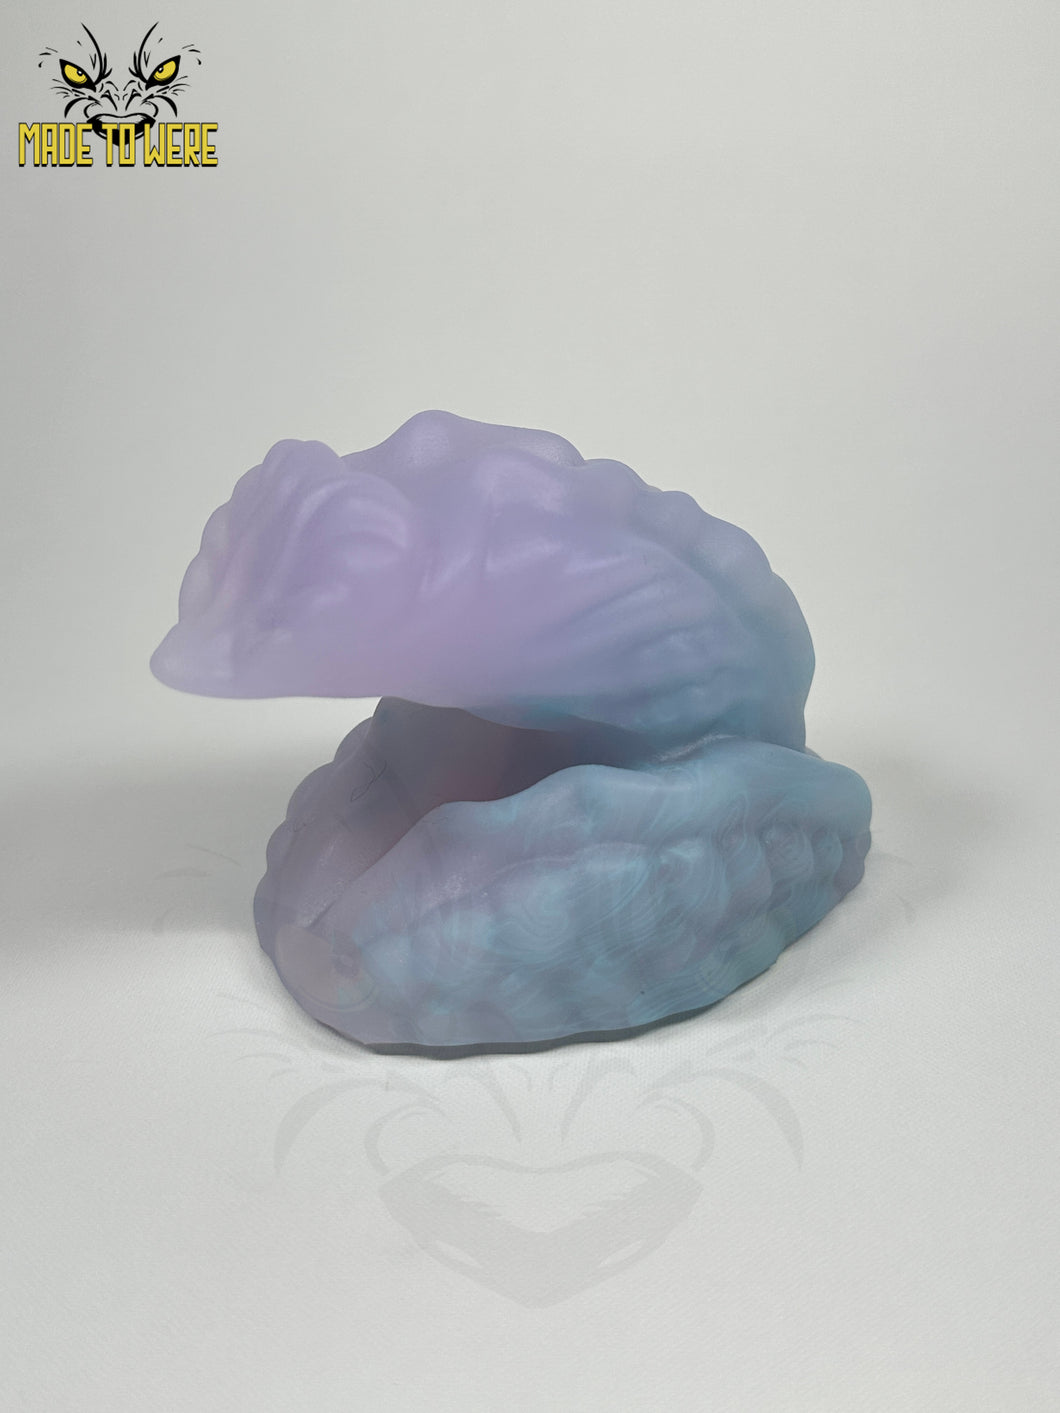 Bask (Packer Version), Small Size, Super Soft Firmness 00-20, Lavender and Teal